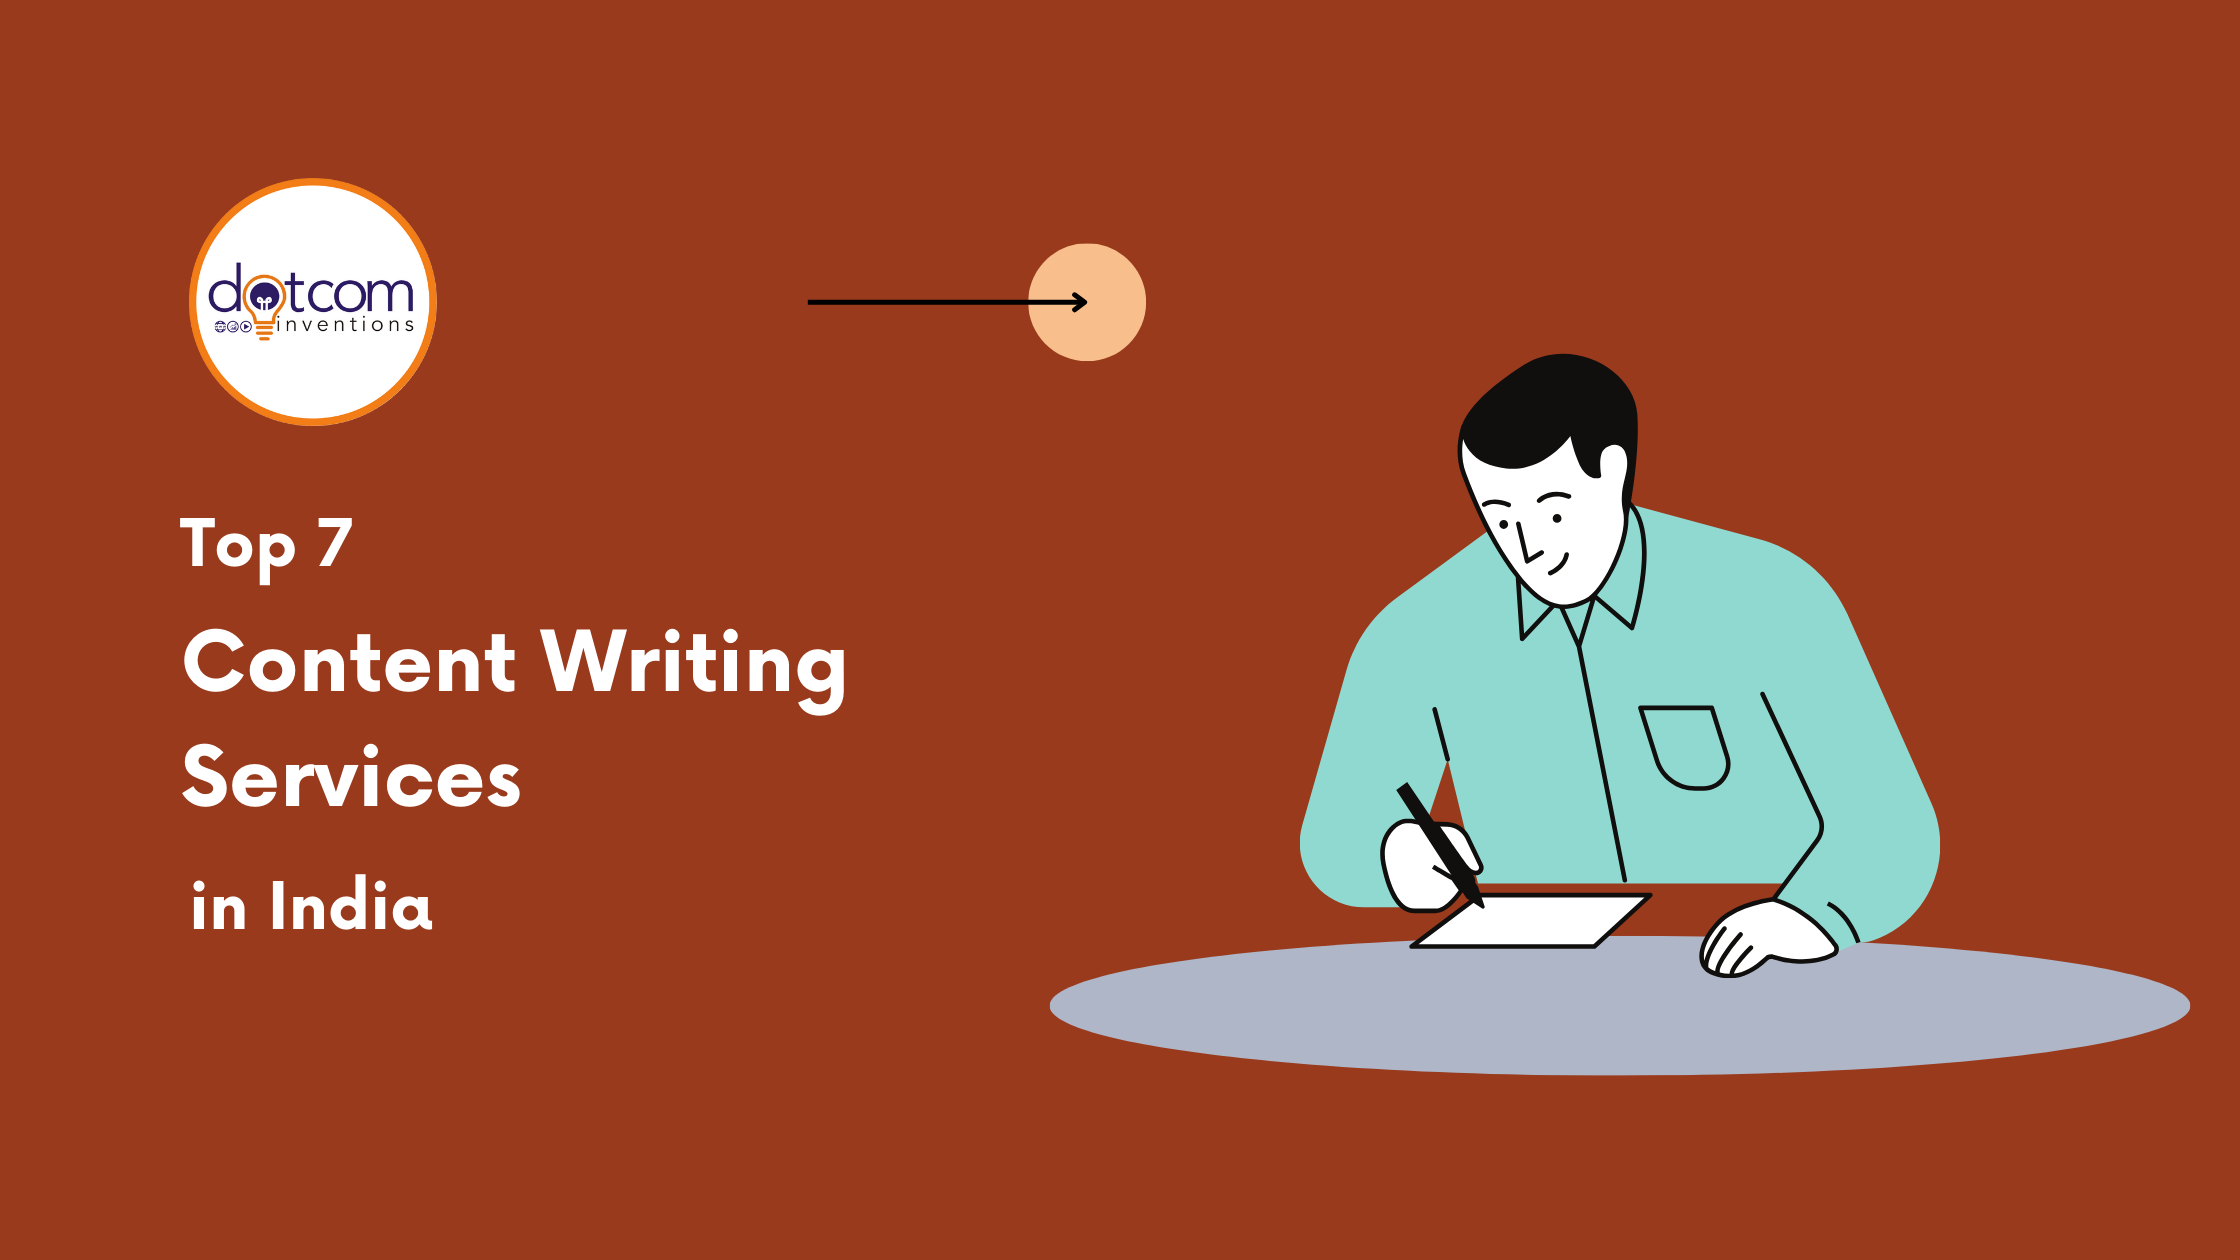 Top 7 content writing services in india